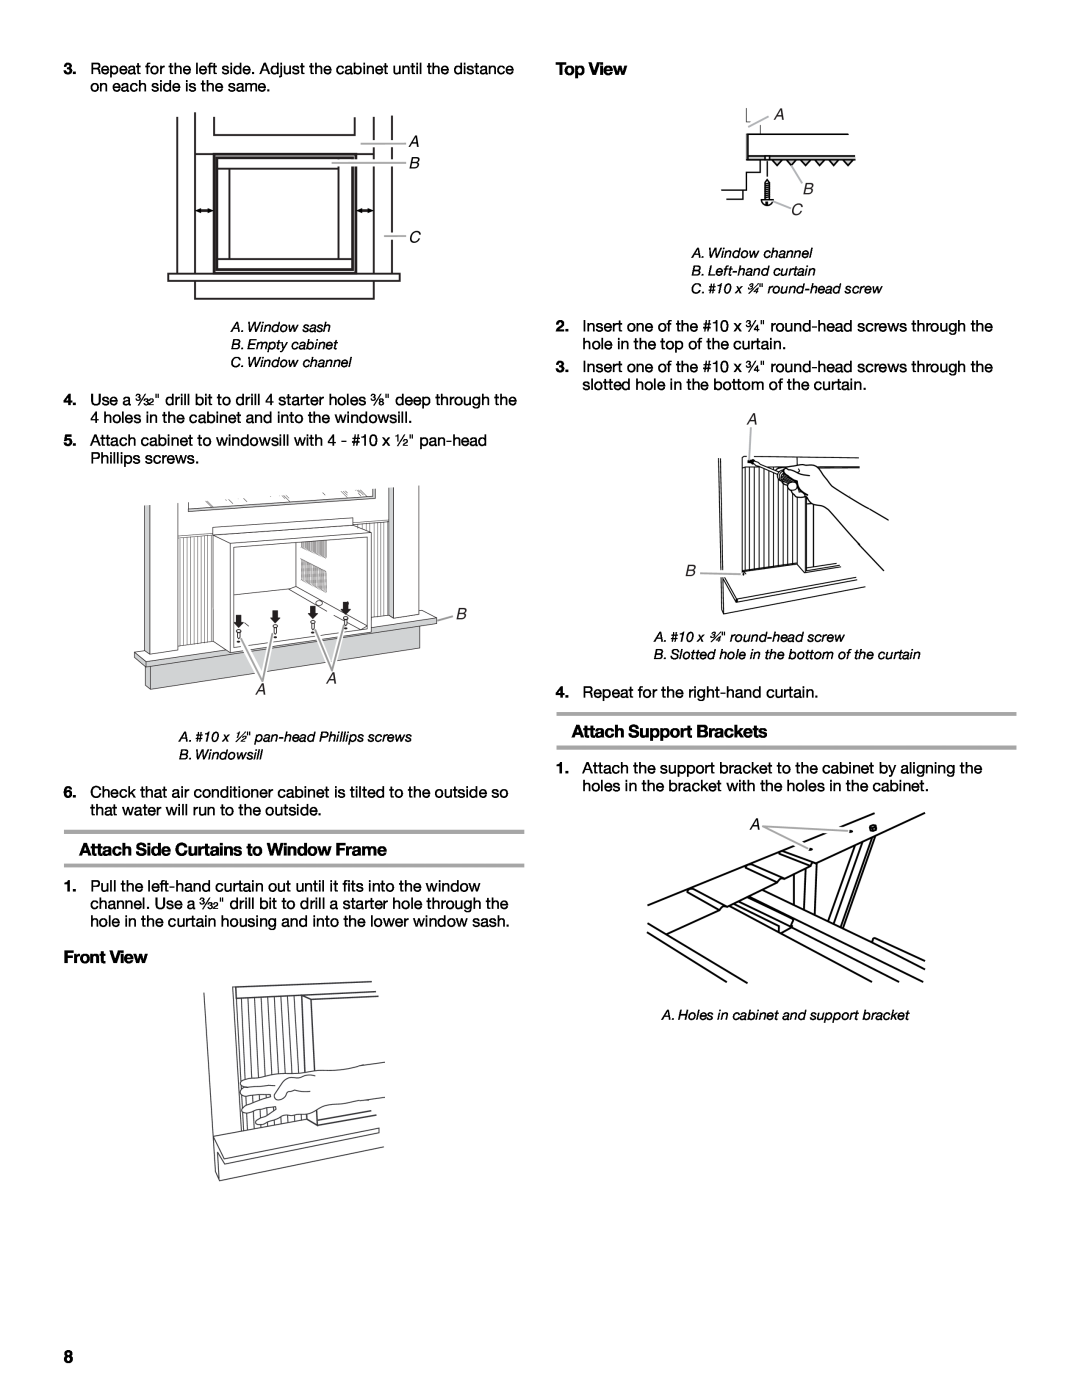 Whirlpool ACE184PT0 manual Top View, Attach Side Curtains to Window Frame, Front View, Attach Support Brackets 